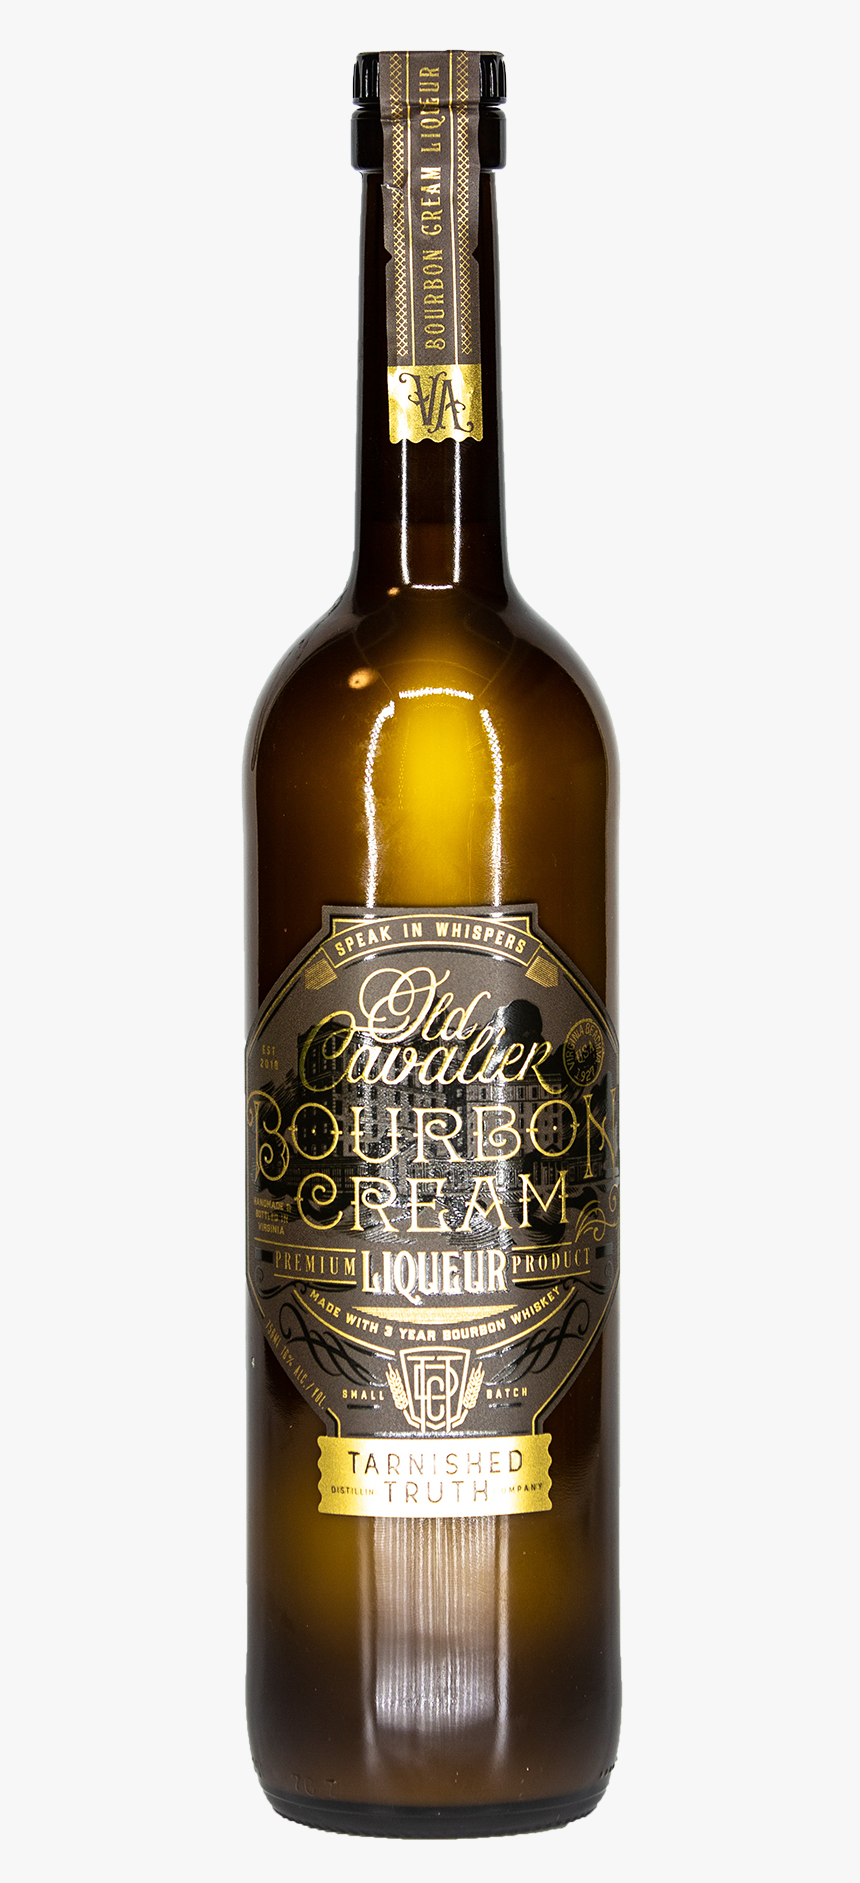 Bottle Of Old Cavalier Bourbon Cream, HD Png Download, Free Download